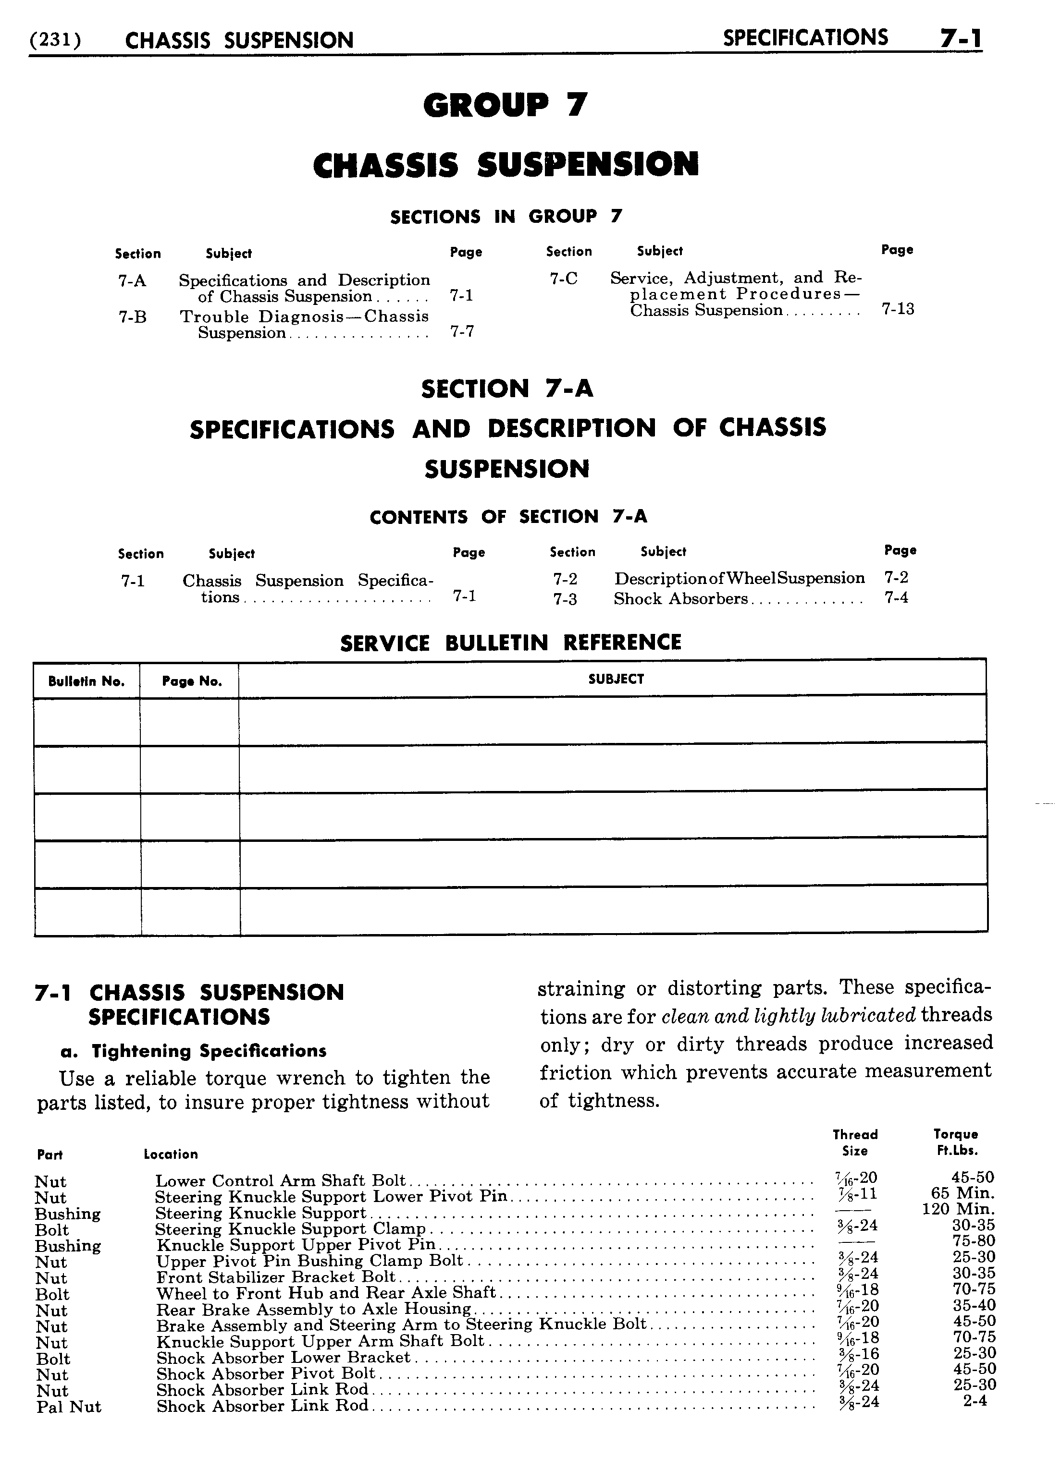 n_08 1954 Buick Shop Manual - Chassis Suspension-001-001.jpg